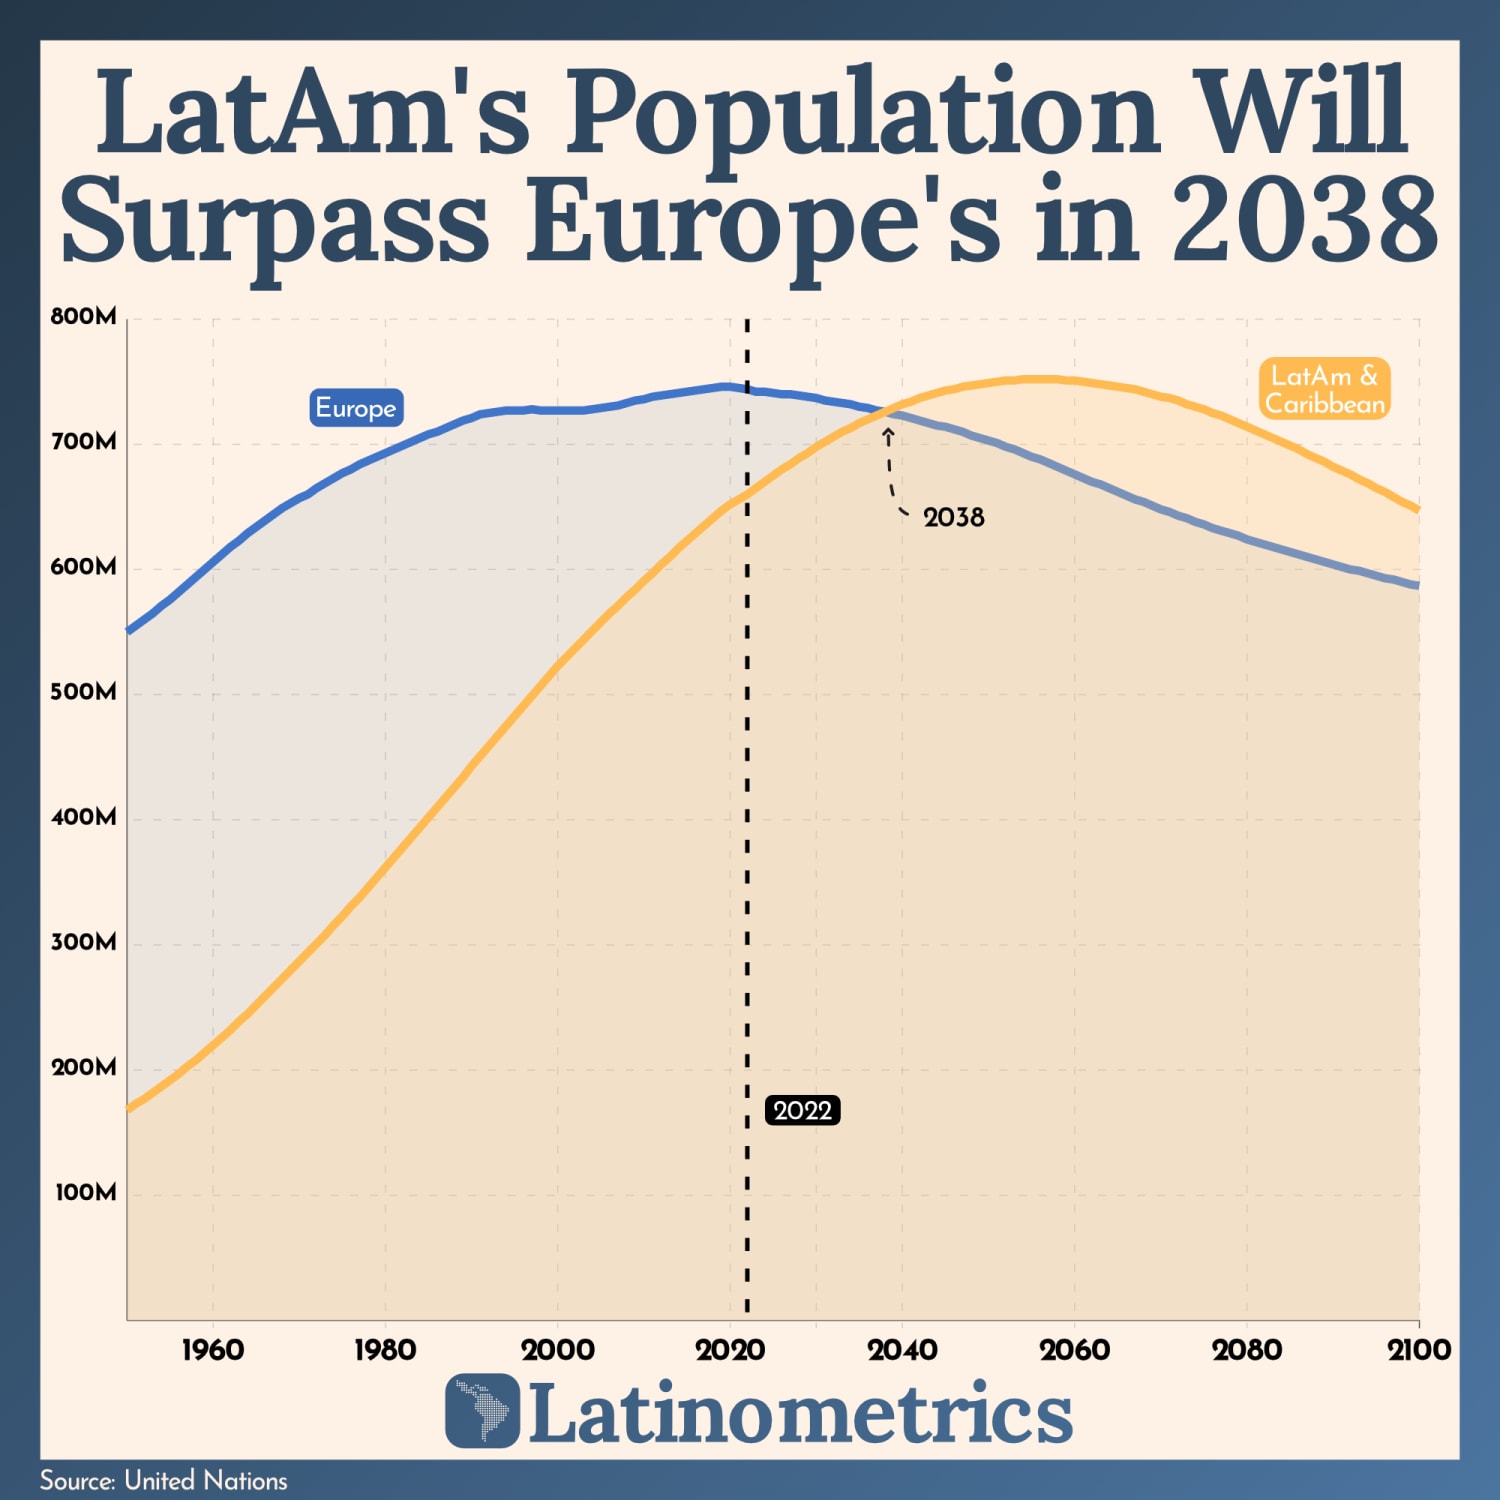 There will soon be more Latinos than Europeans.